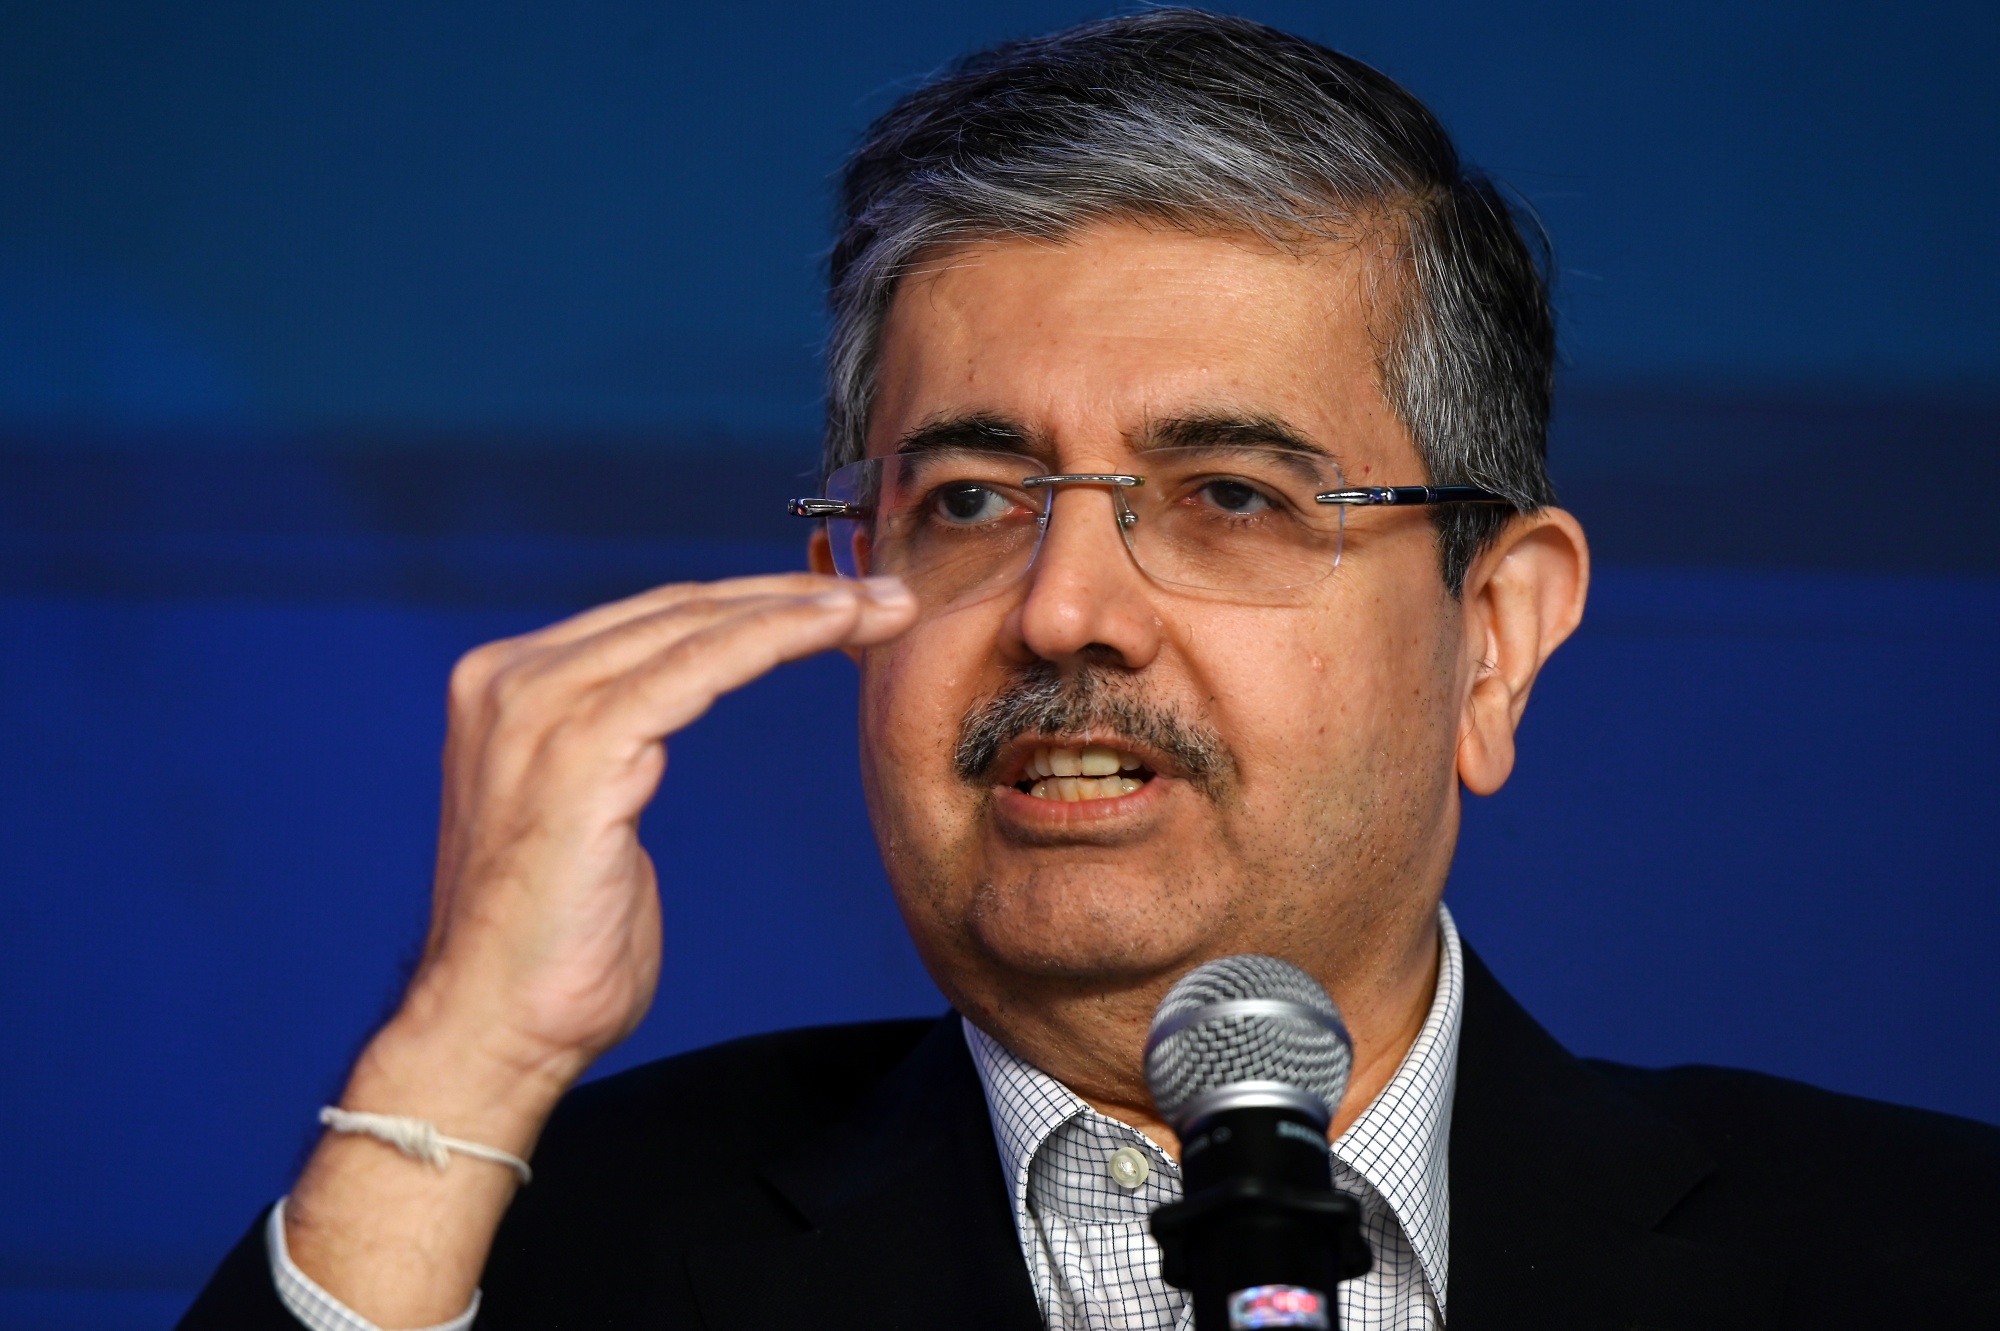 The new Kotak Mahindra Bank: How the financial services giant is